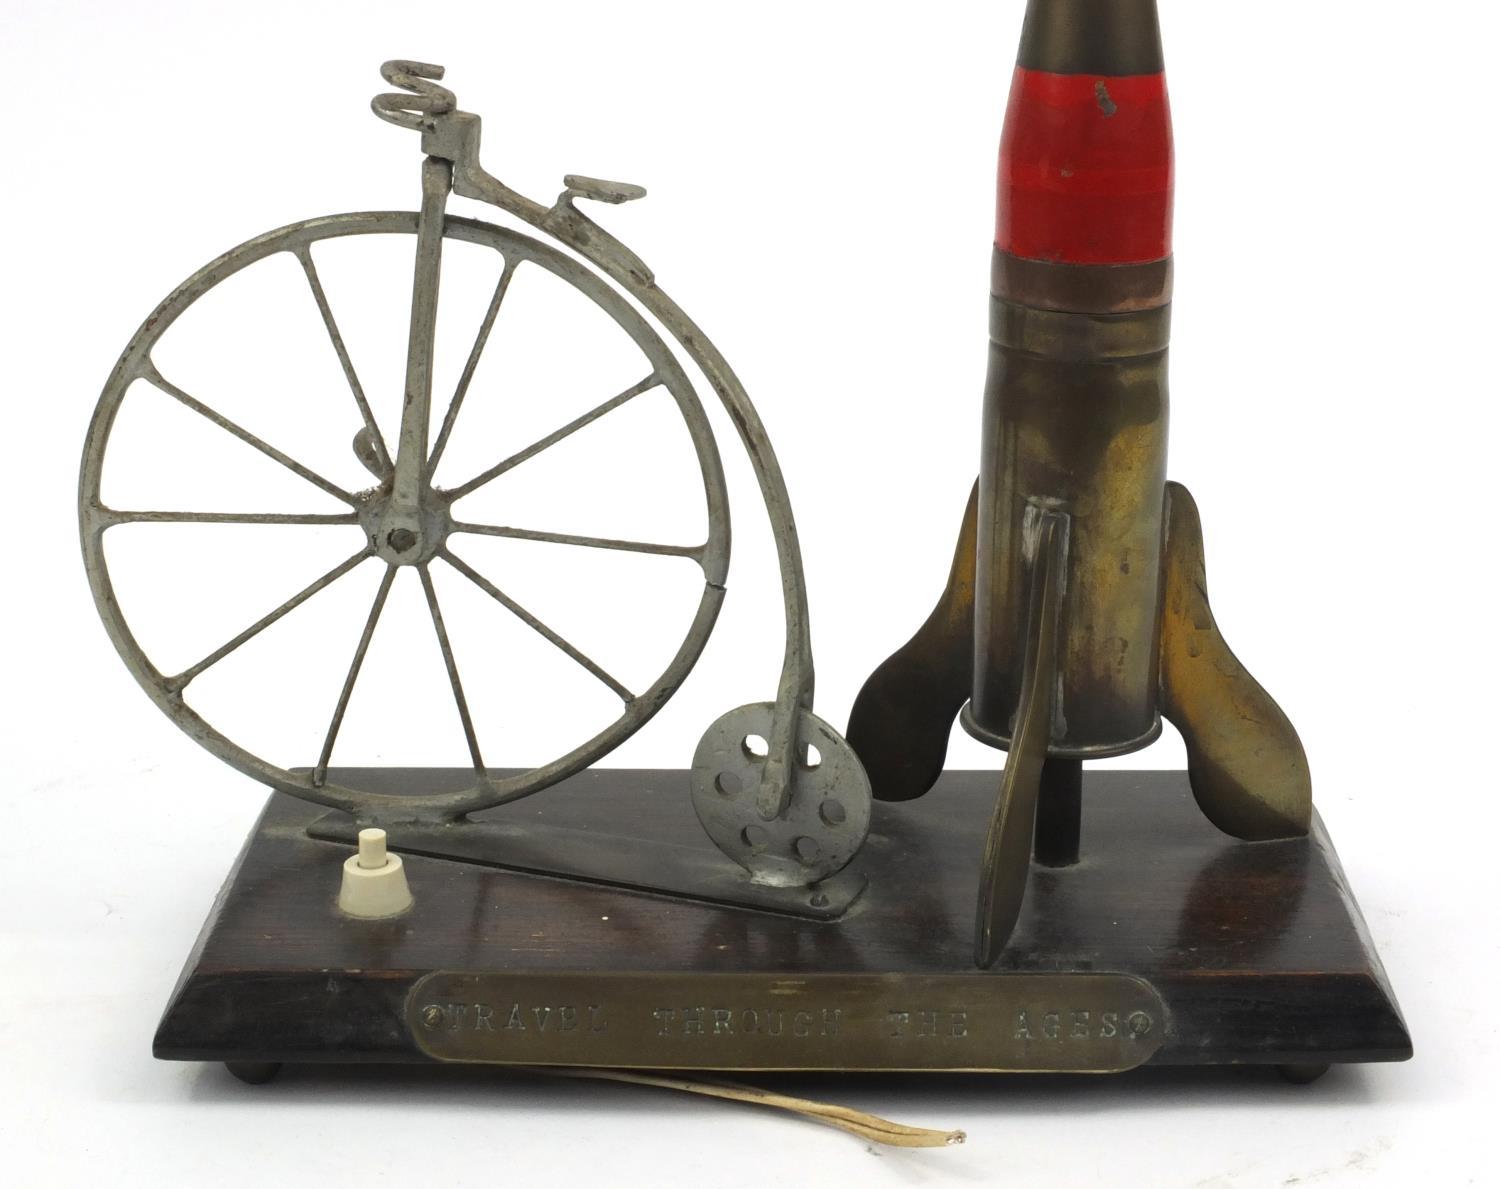 Military interest trench art table light titled 'Travel Through The Ages', raised on an oak base, - Image 5 of 11